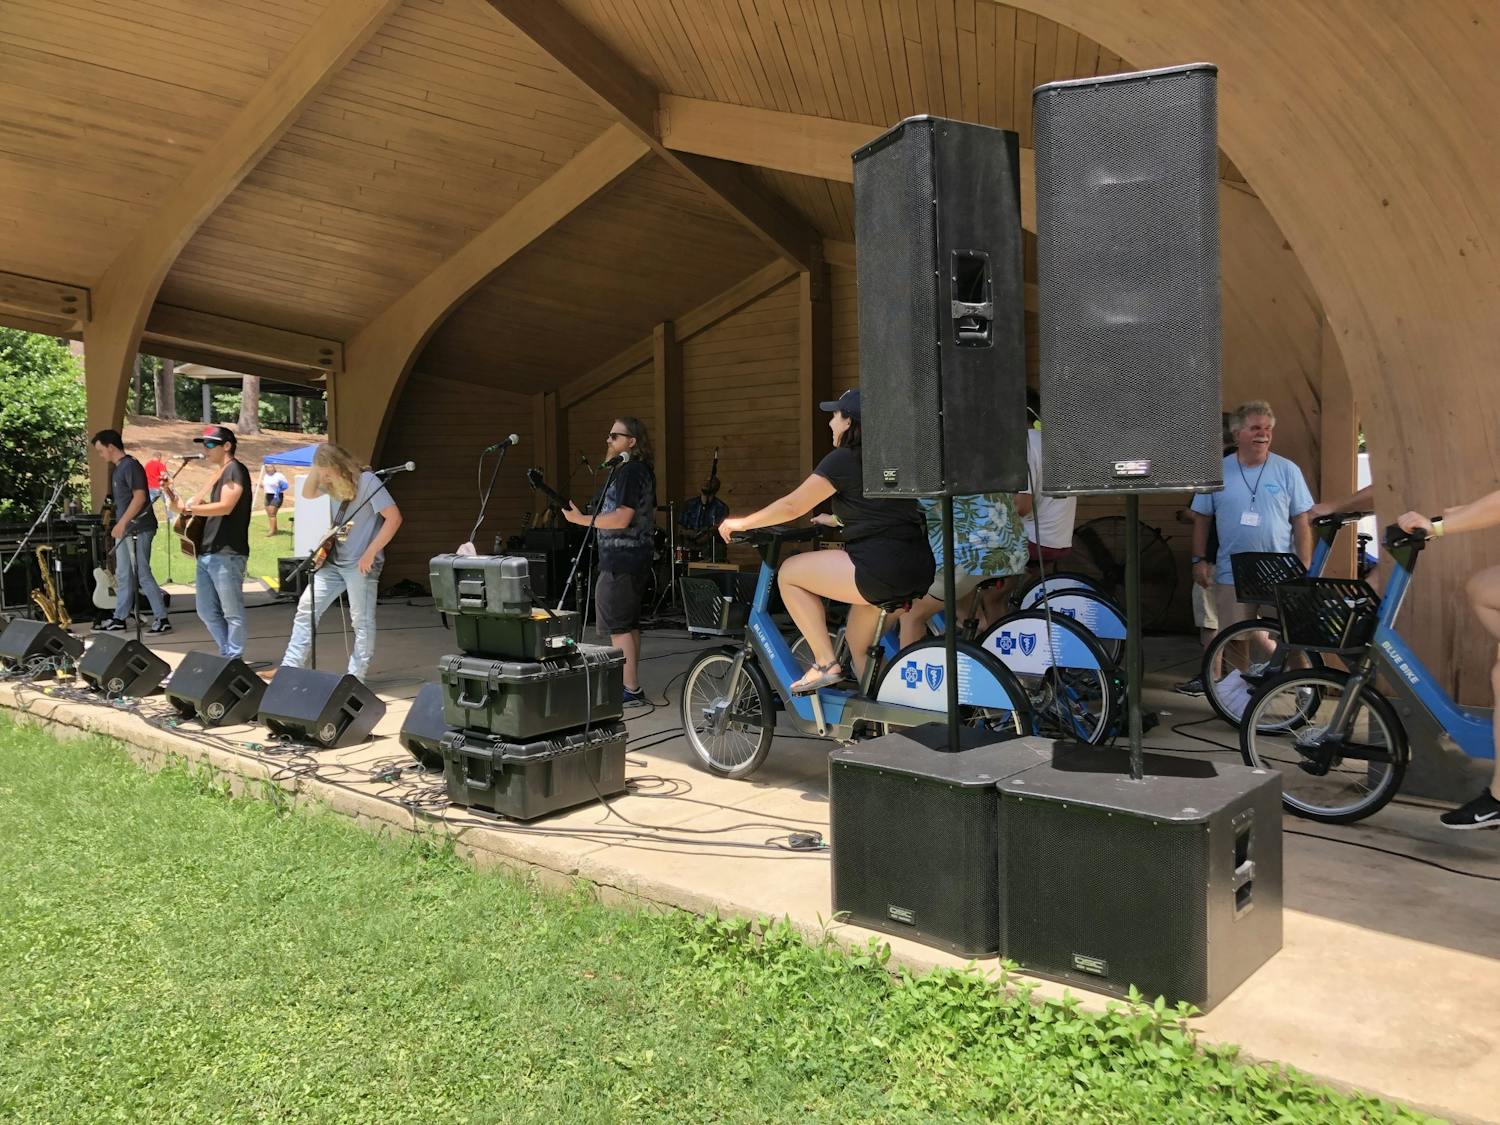 Volunteers ride stationary bikes powering live music at SolFest RollFest on July 2, 2022. This is the first bike-powered music festival in Columbia.&nbsp;